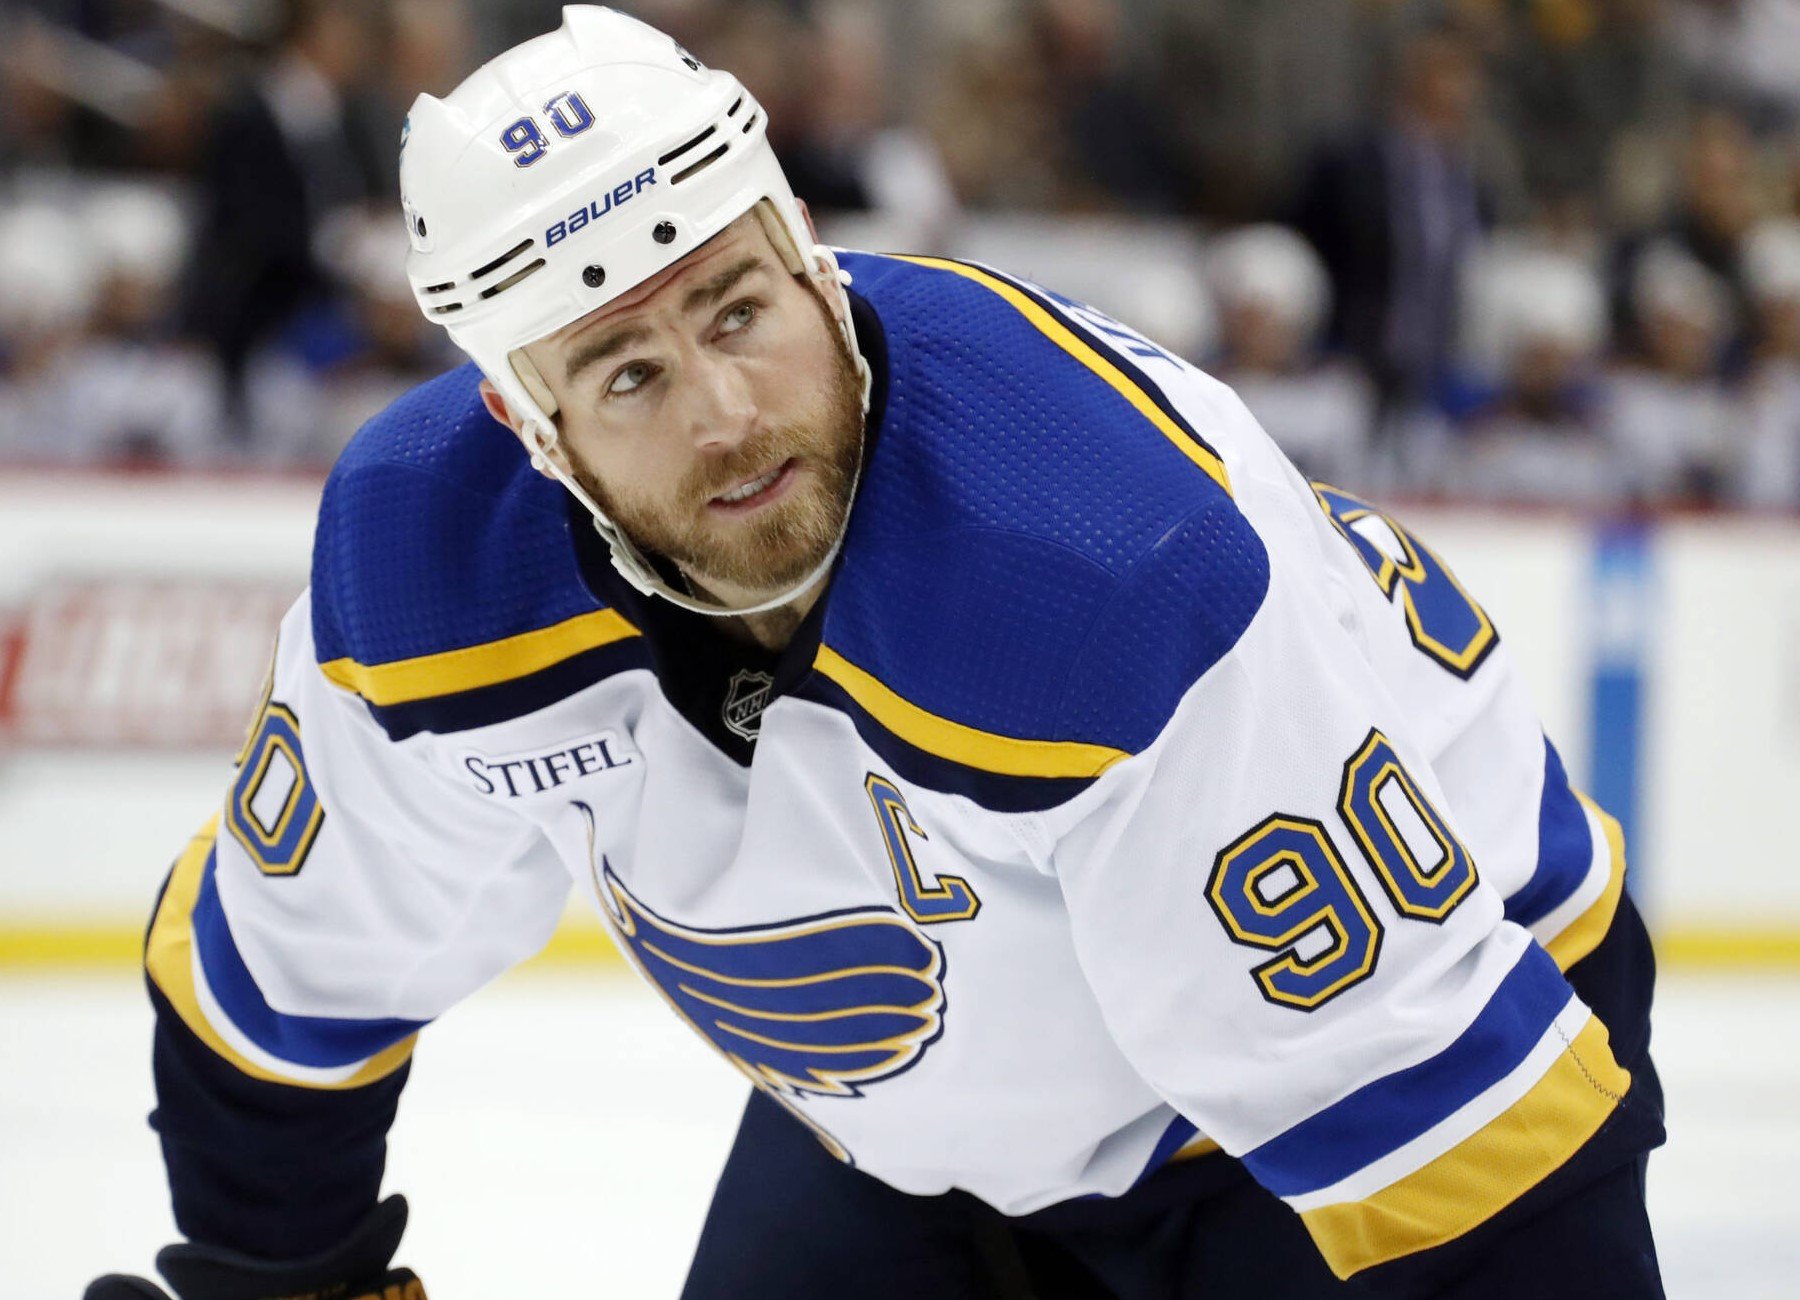 Ryan O'Reilly, Noel Acciari fit just what the Leafs need